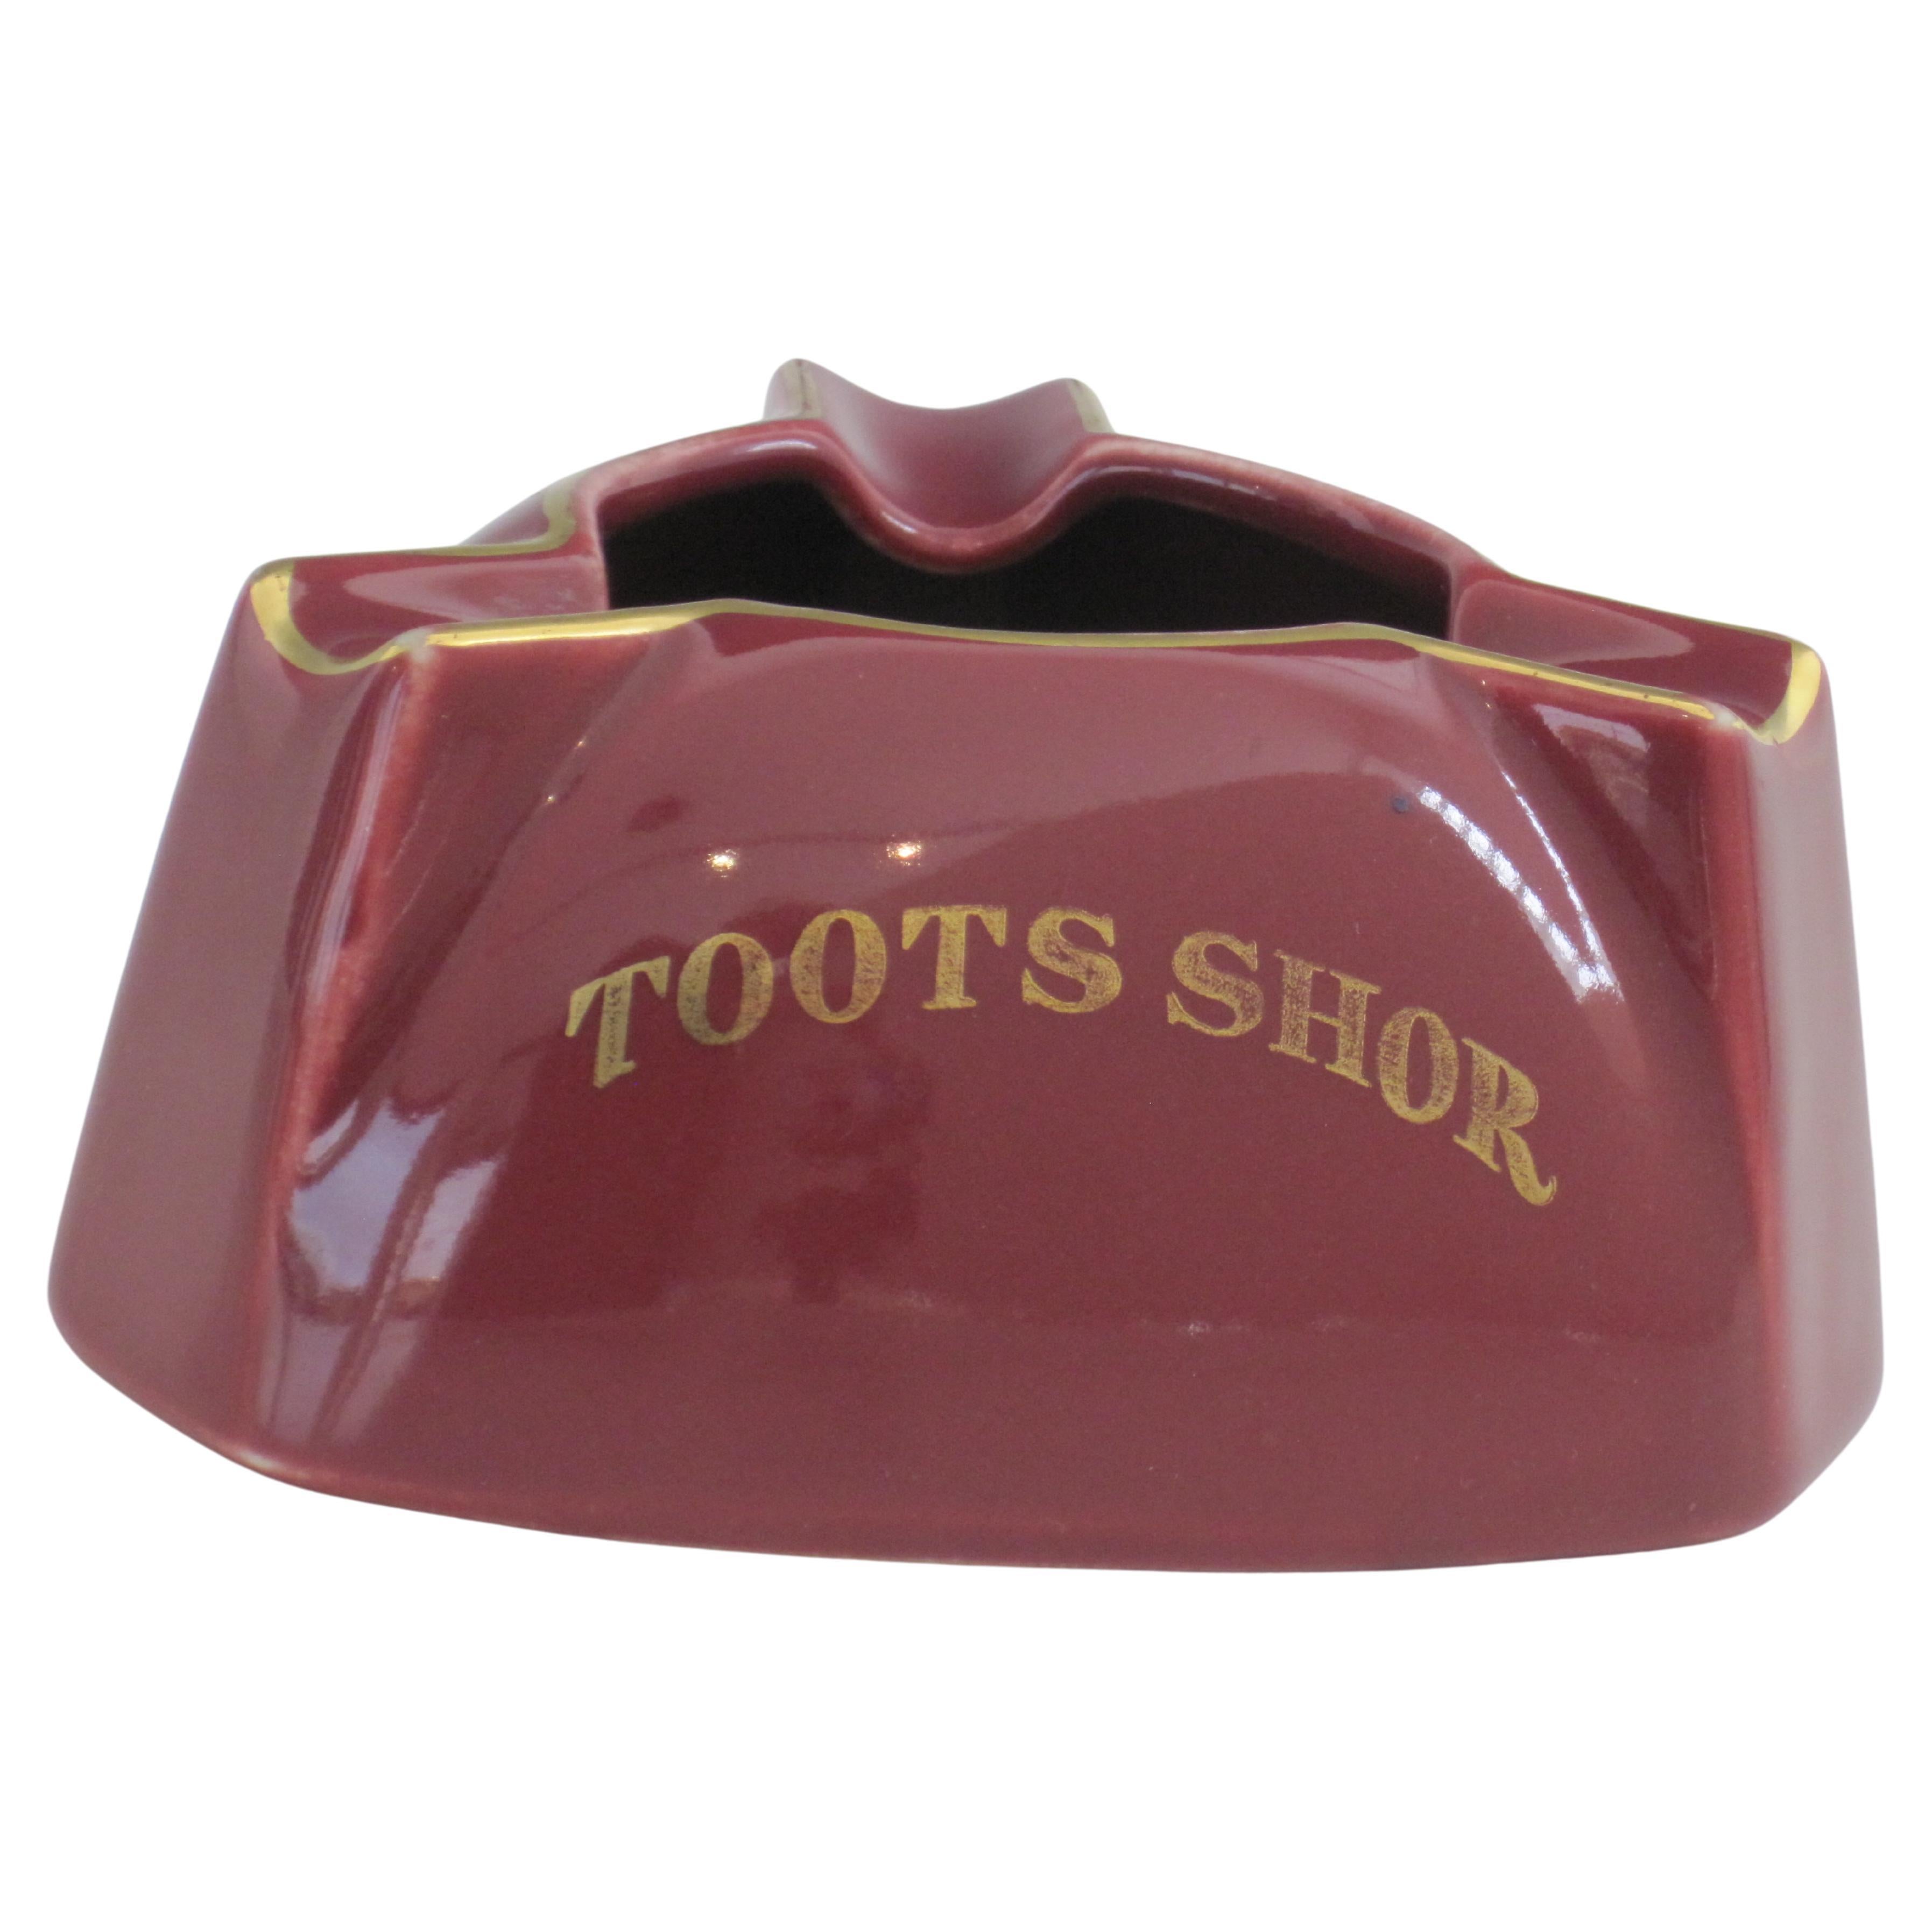 1950s Toots Shor Restaurant Ashtray For Sale